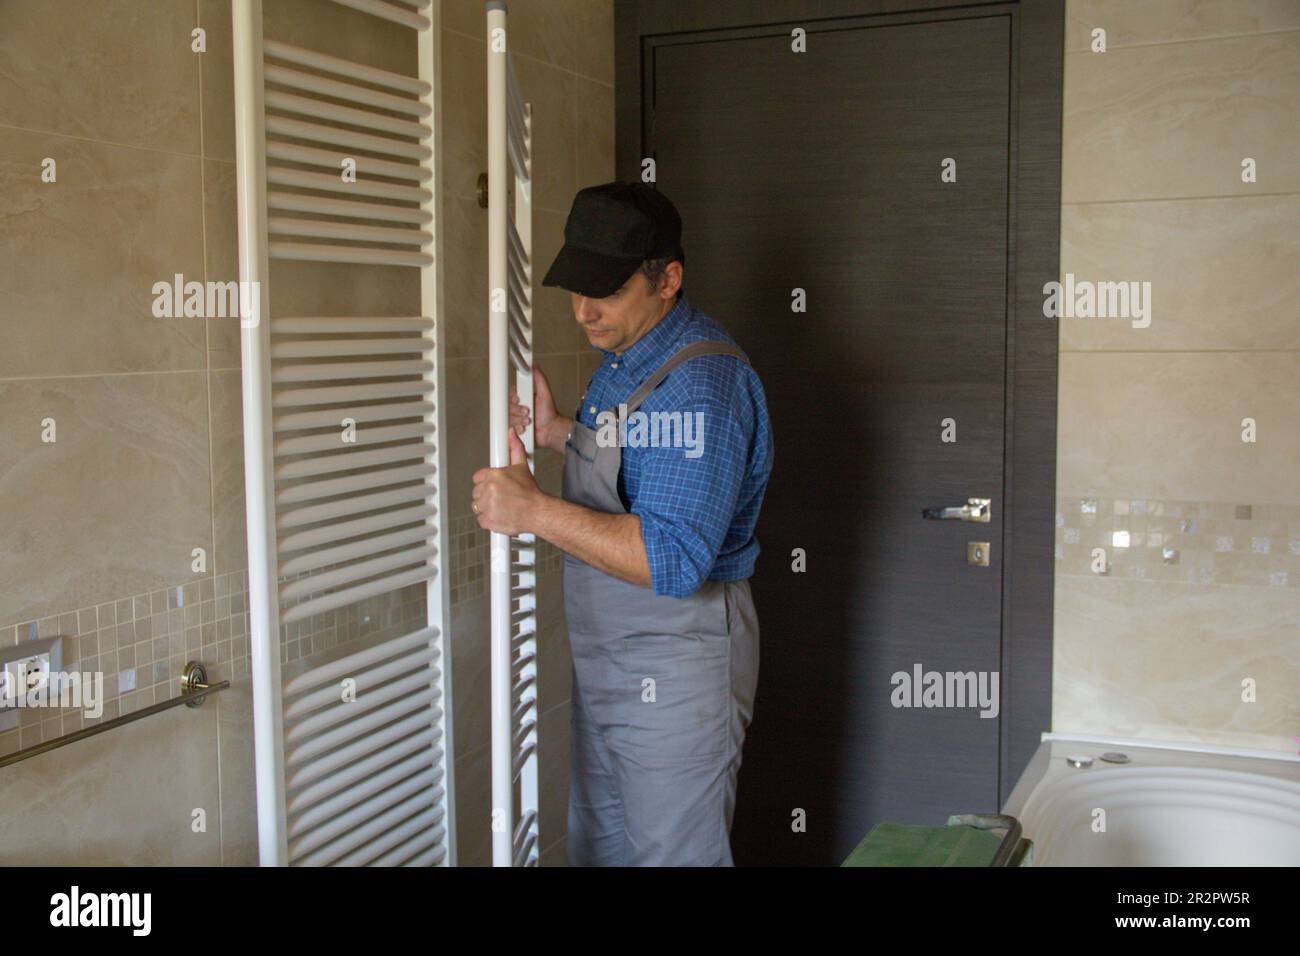 Image of a plumber while he is assembling a radiator like a towel warmer in a bathroom at home. Stock Photo